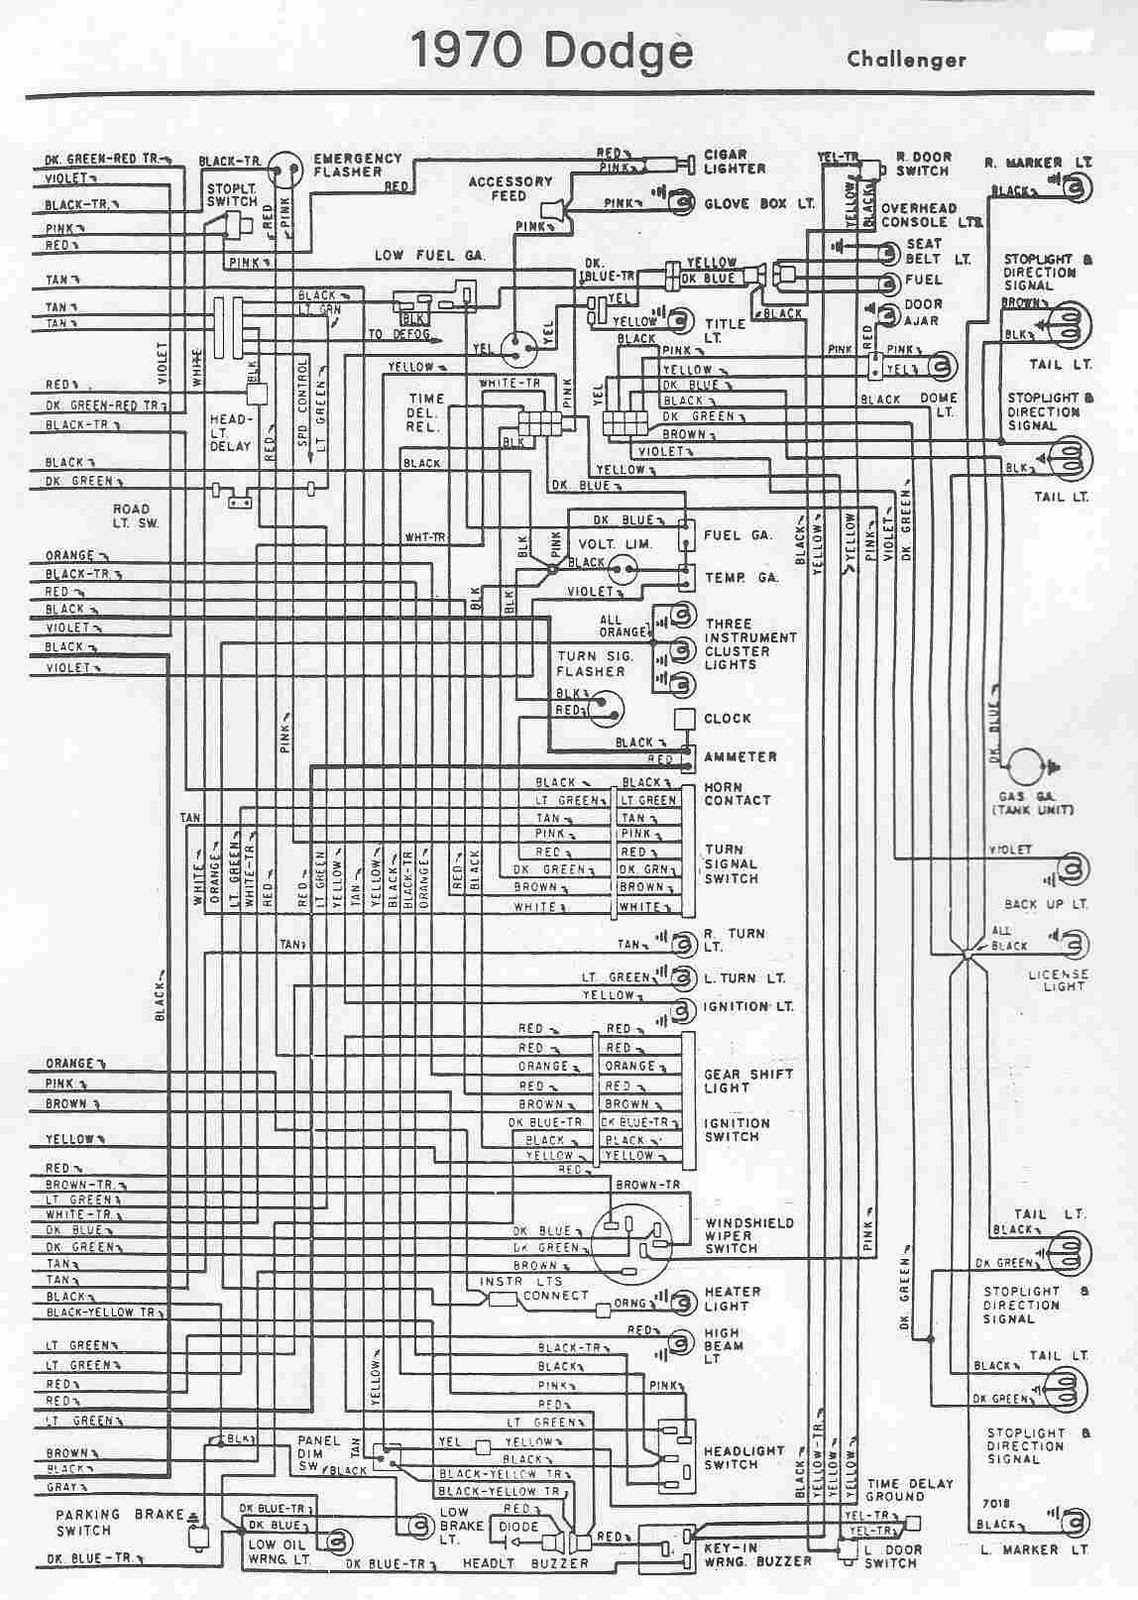 Dodge Challenger 1970 Wiring Diagram All About Wiring Diagrams